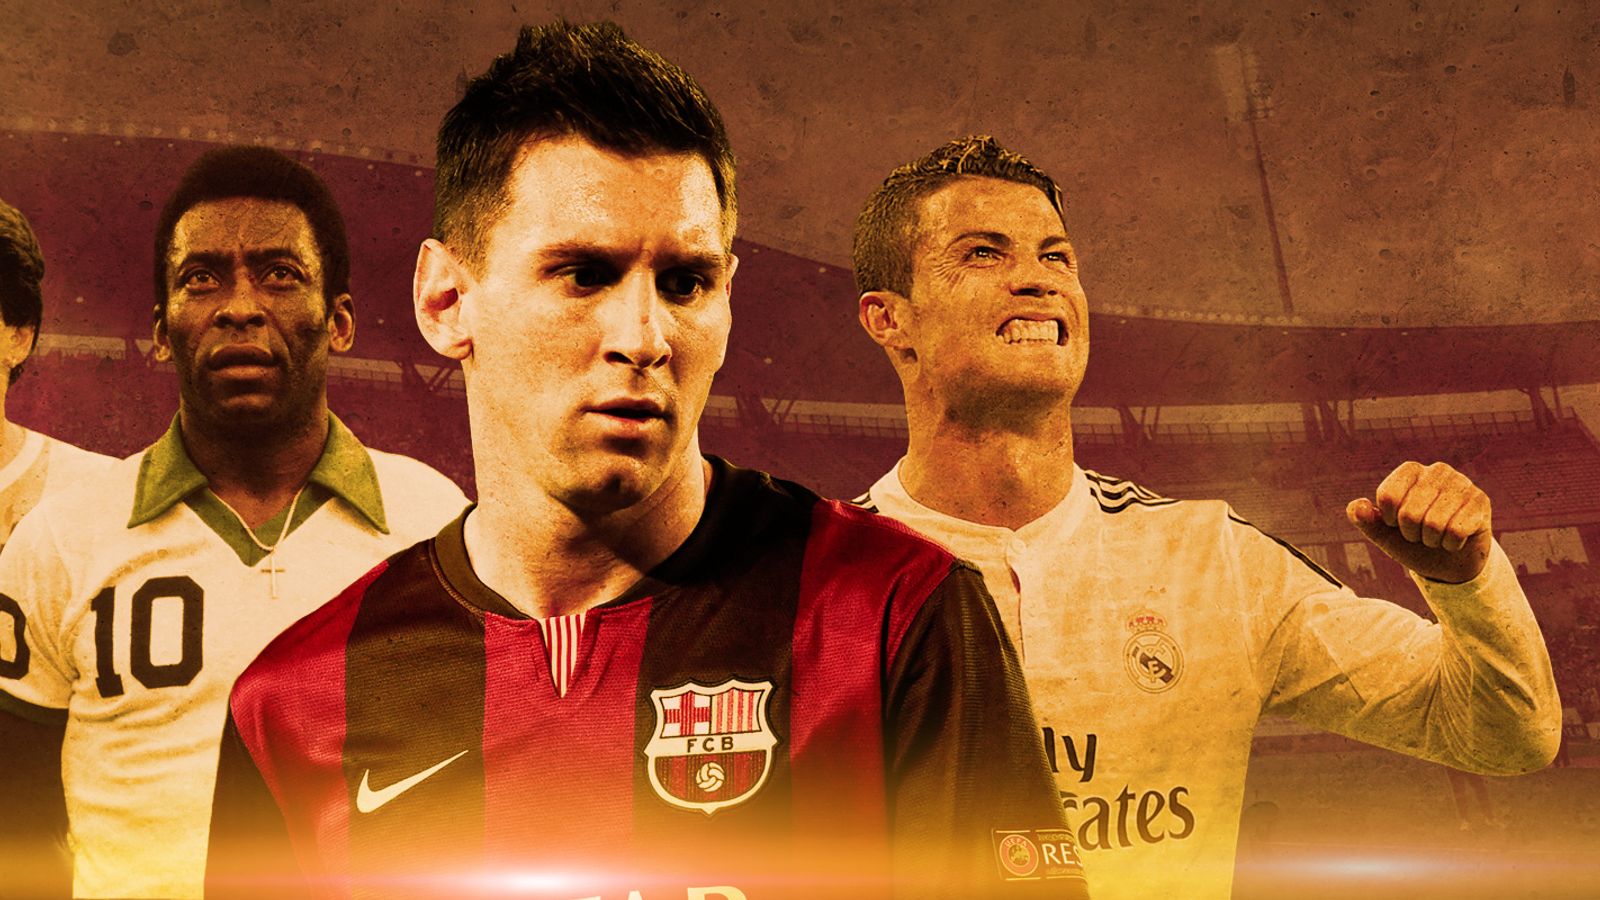 Download Two of the greatest soccer players of all time: Messi and Ronaldo  Wallpaper